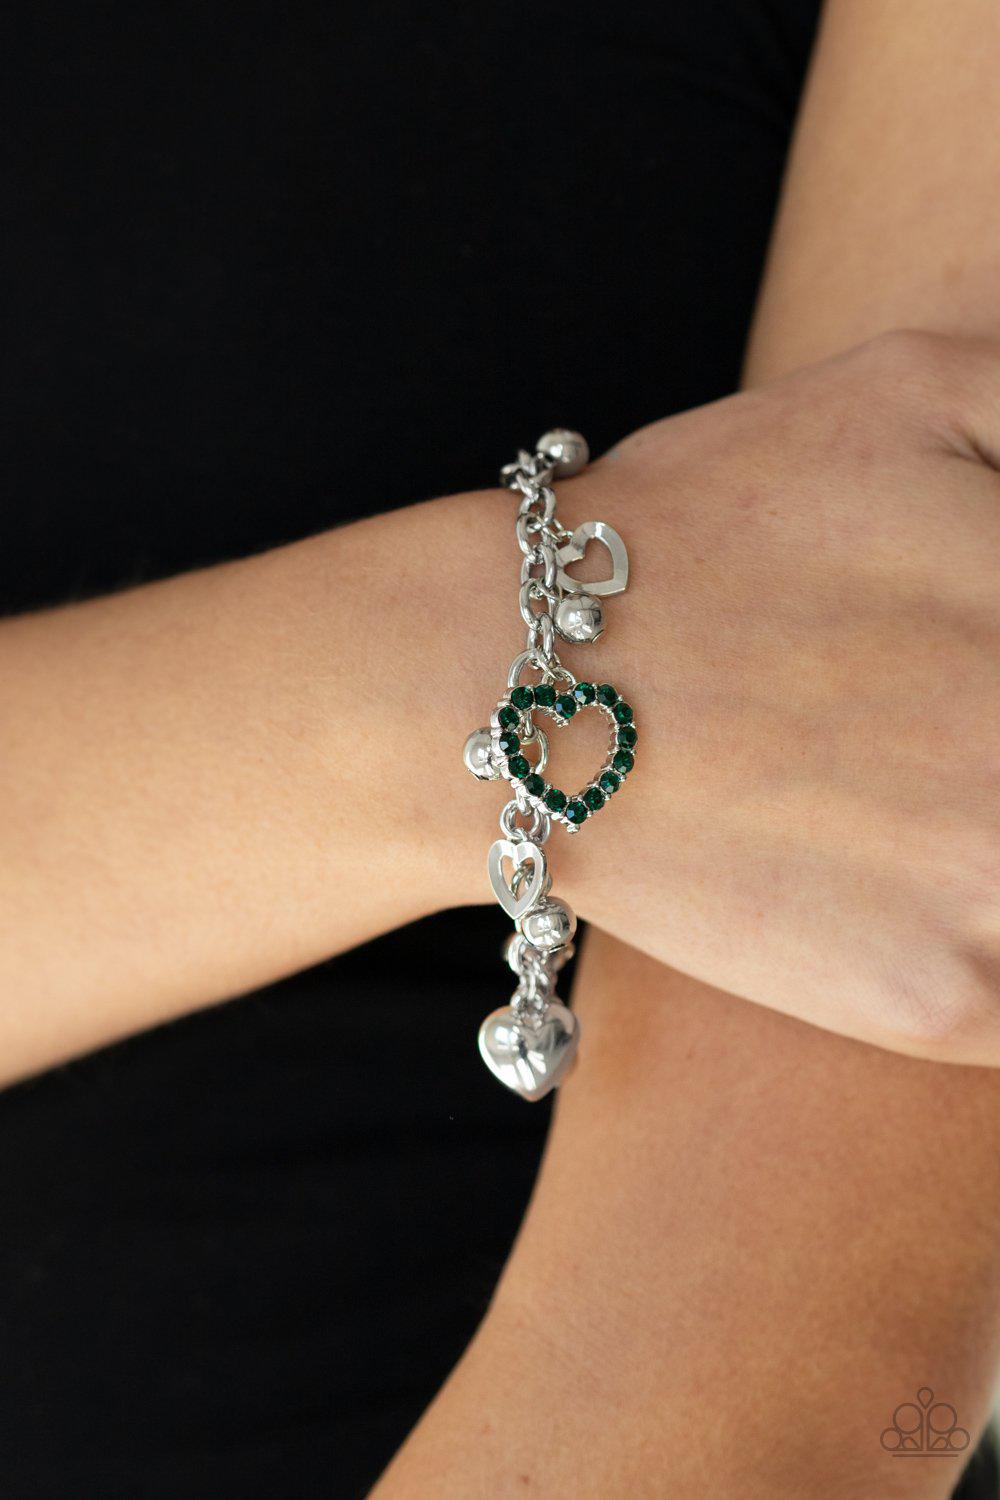 Beautifully Big-Hearted Green Rhinestone and Silver Heart Charm Bracelet - Paparazzi Accessories - model -CarasShop.com - $5 Jewelry by Cara Jewels